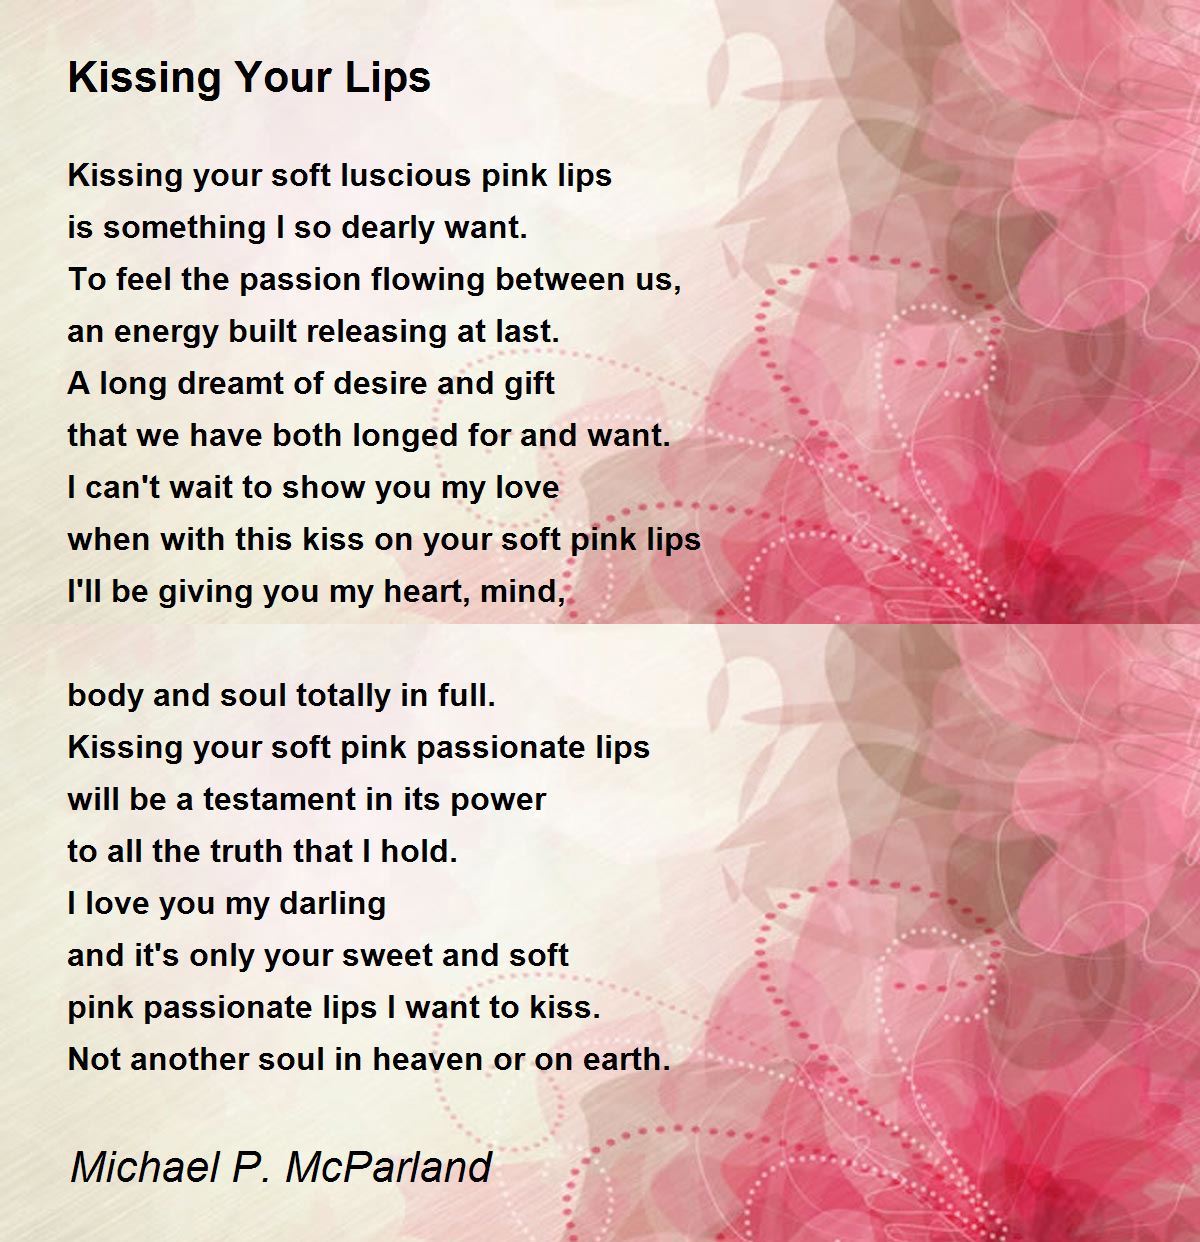 Your beautiful lips poem